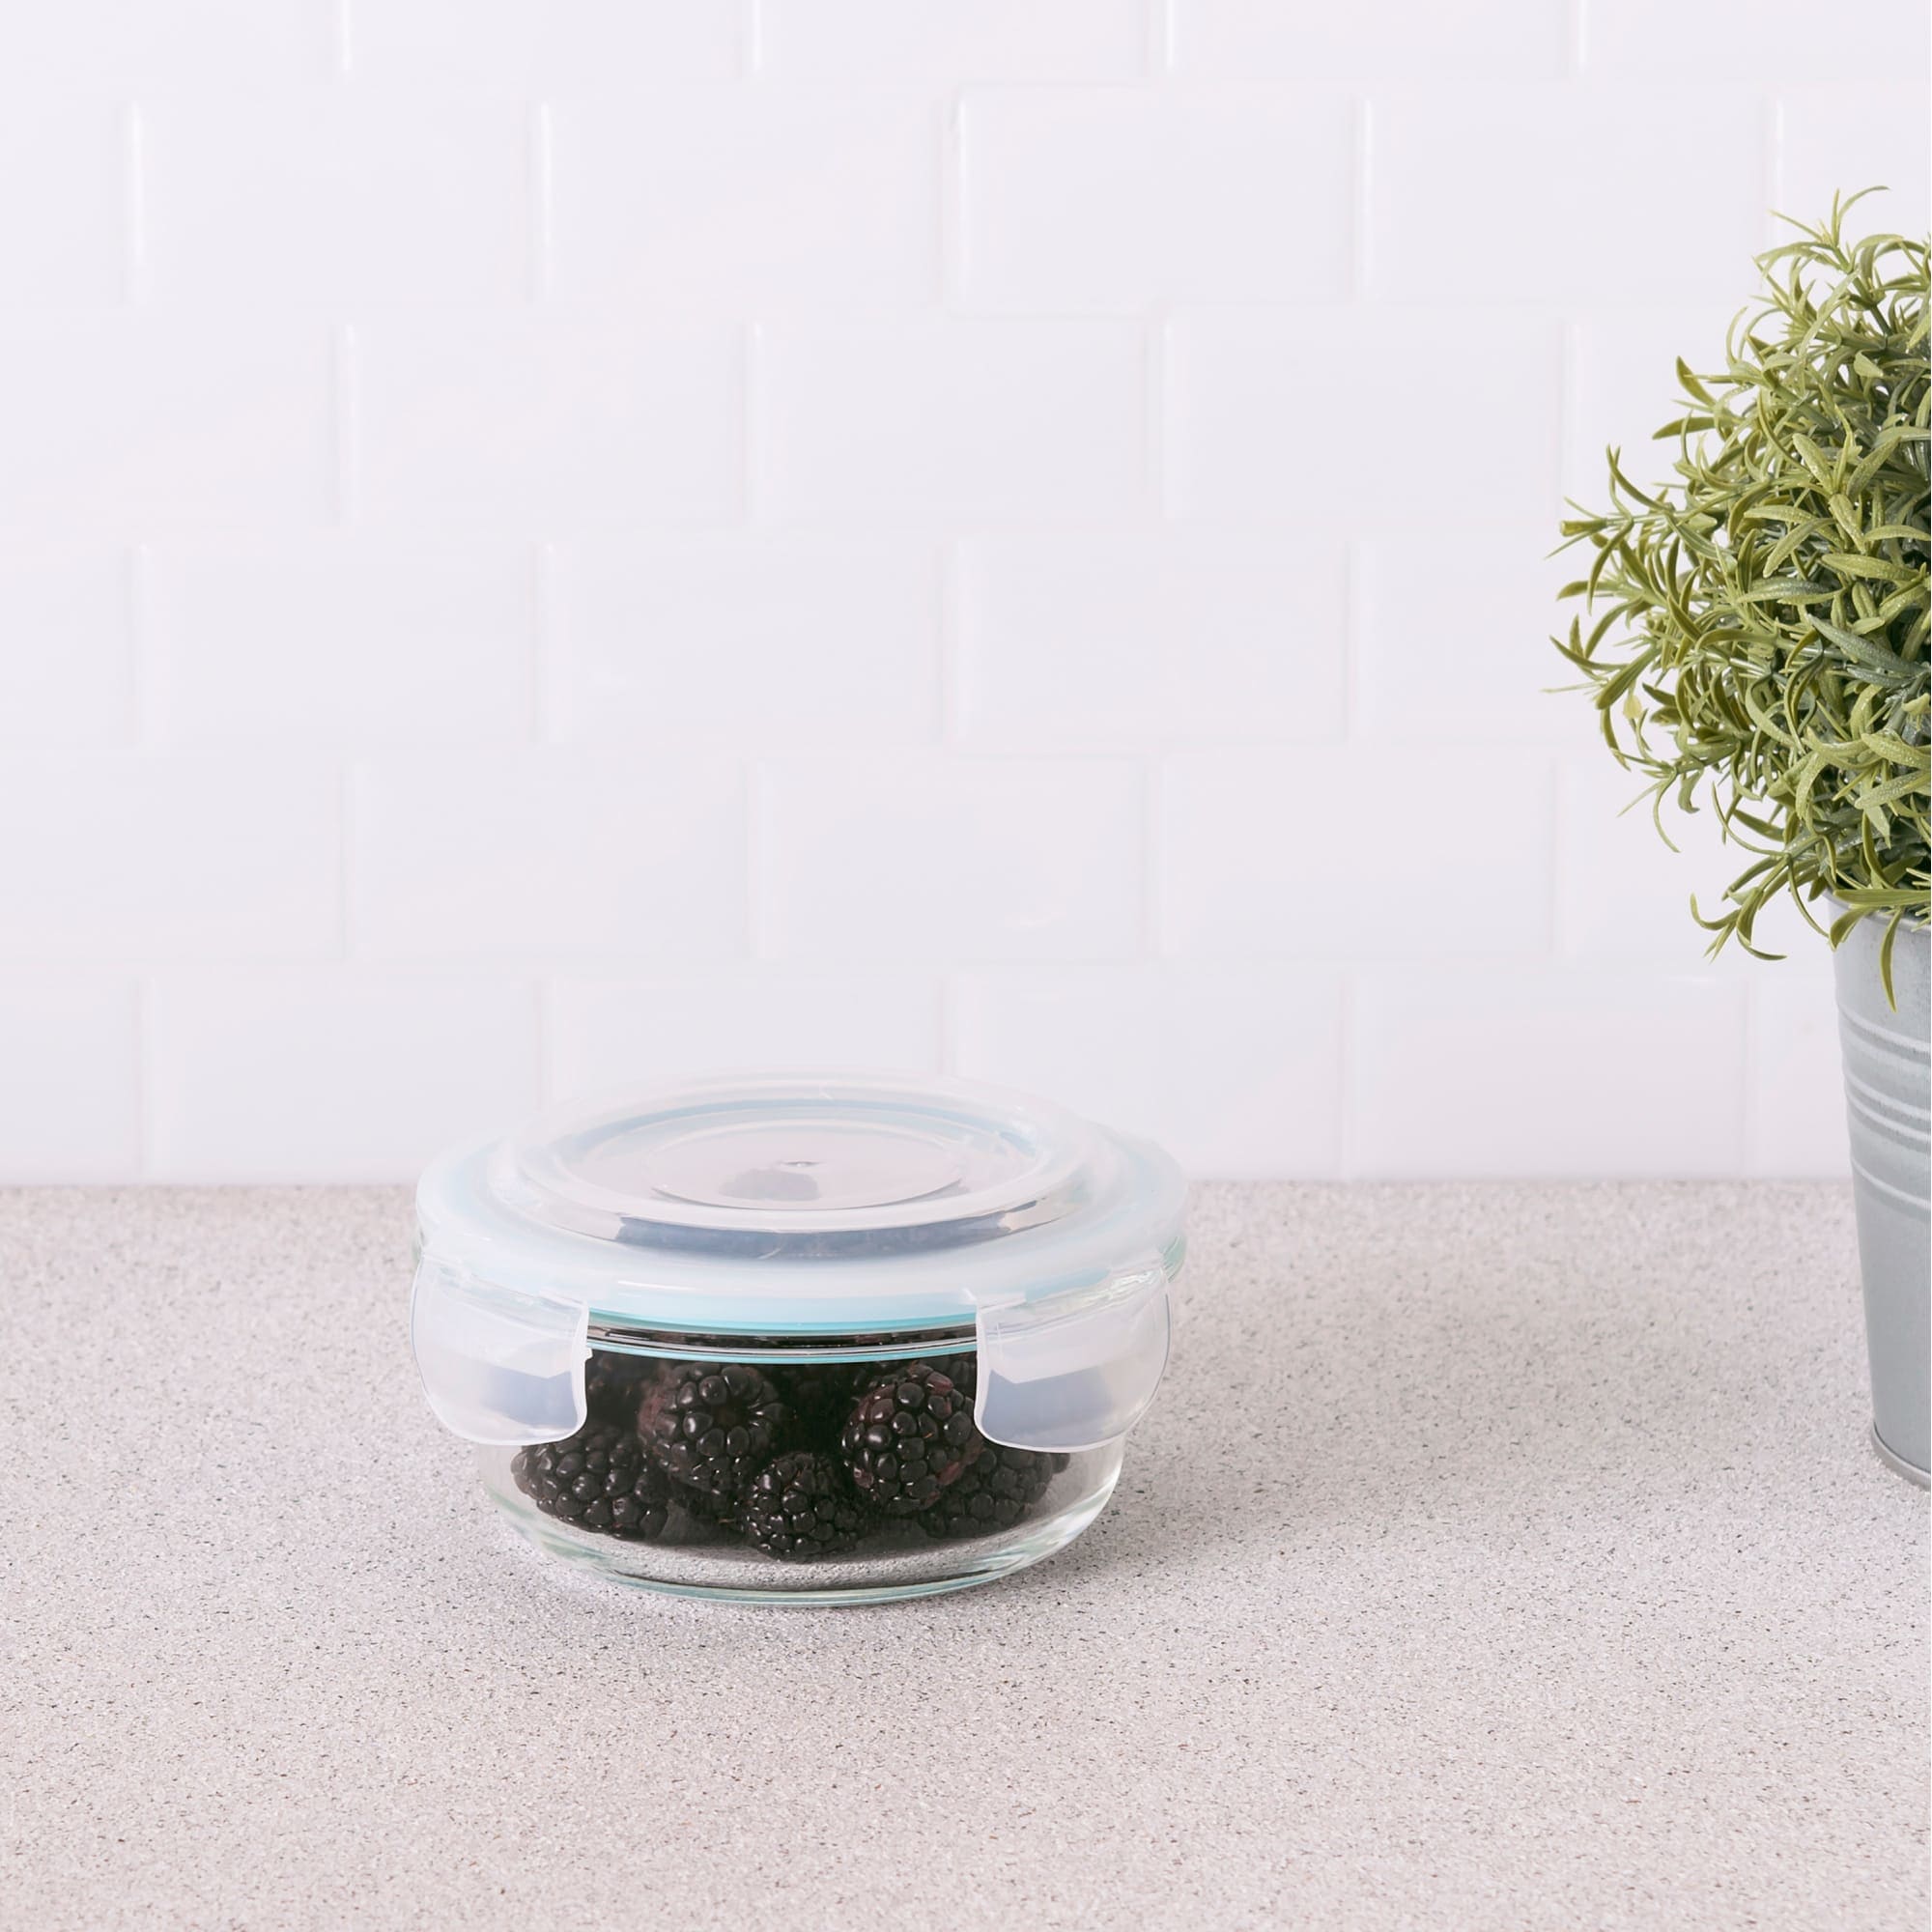 Home Basics 13 oz. Round Borosilicate Glass Food Storage Container $3 EACH, CASE PACK OF 12